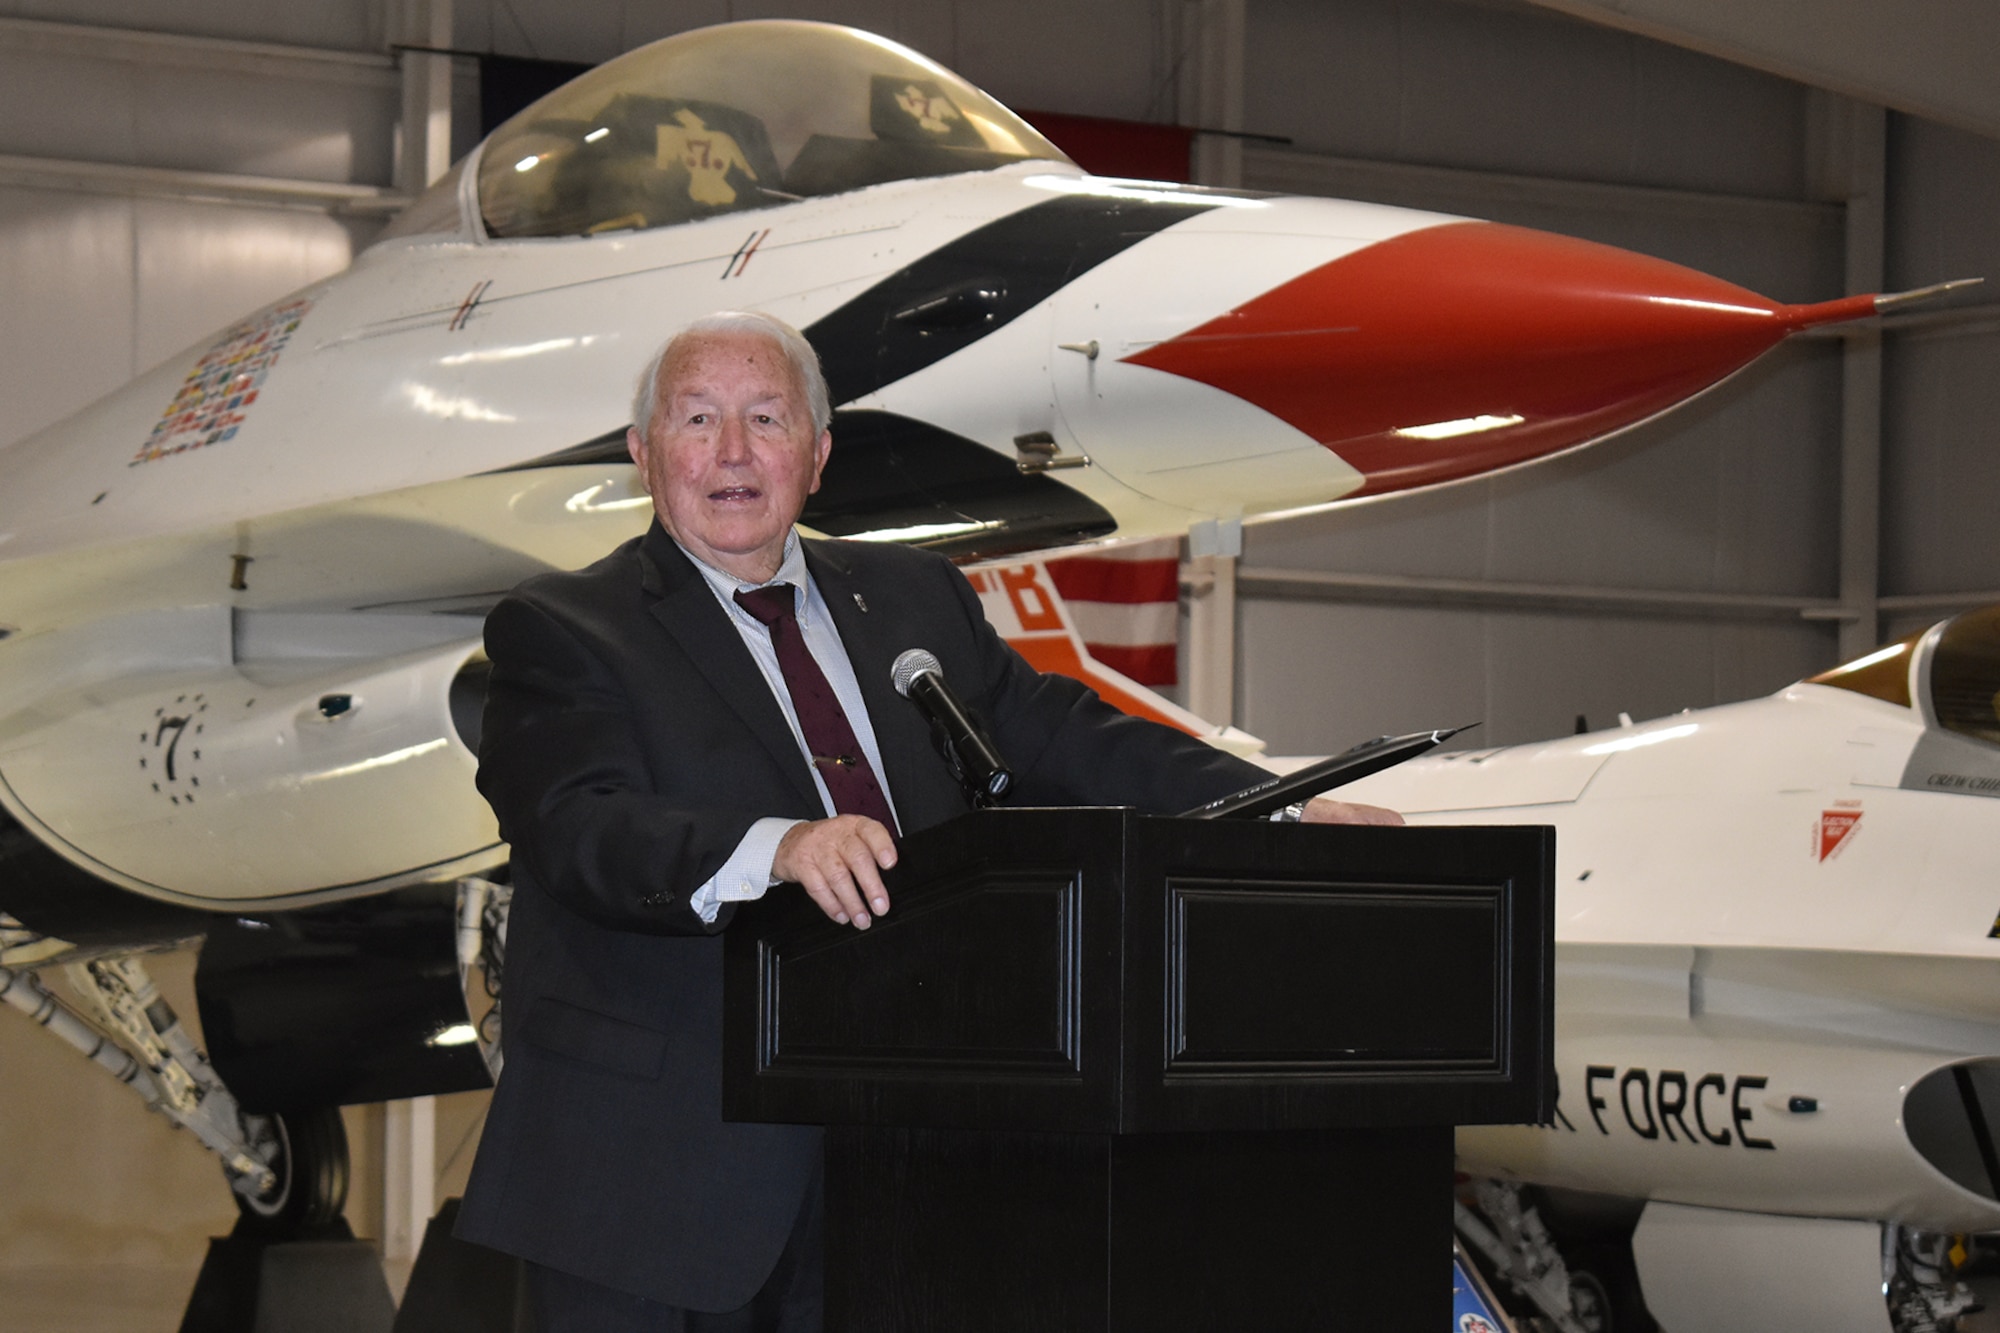 Retired Air Force Col. James Sullivan stands behind a podium located in front of a static display of a U.S. Air Force Thunderbirds-painted F-16 inside the Hill Aerospace Museum.